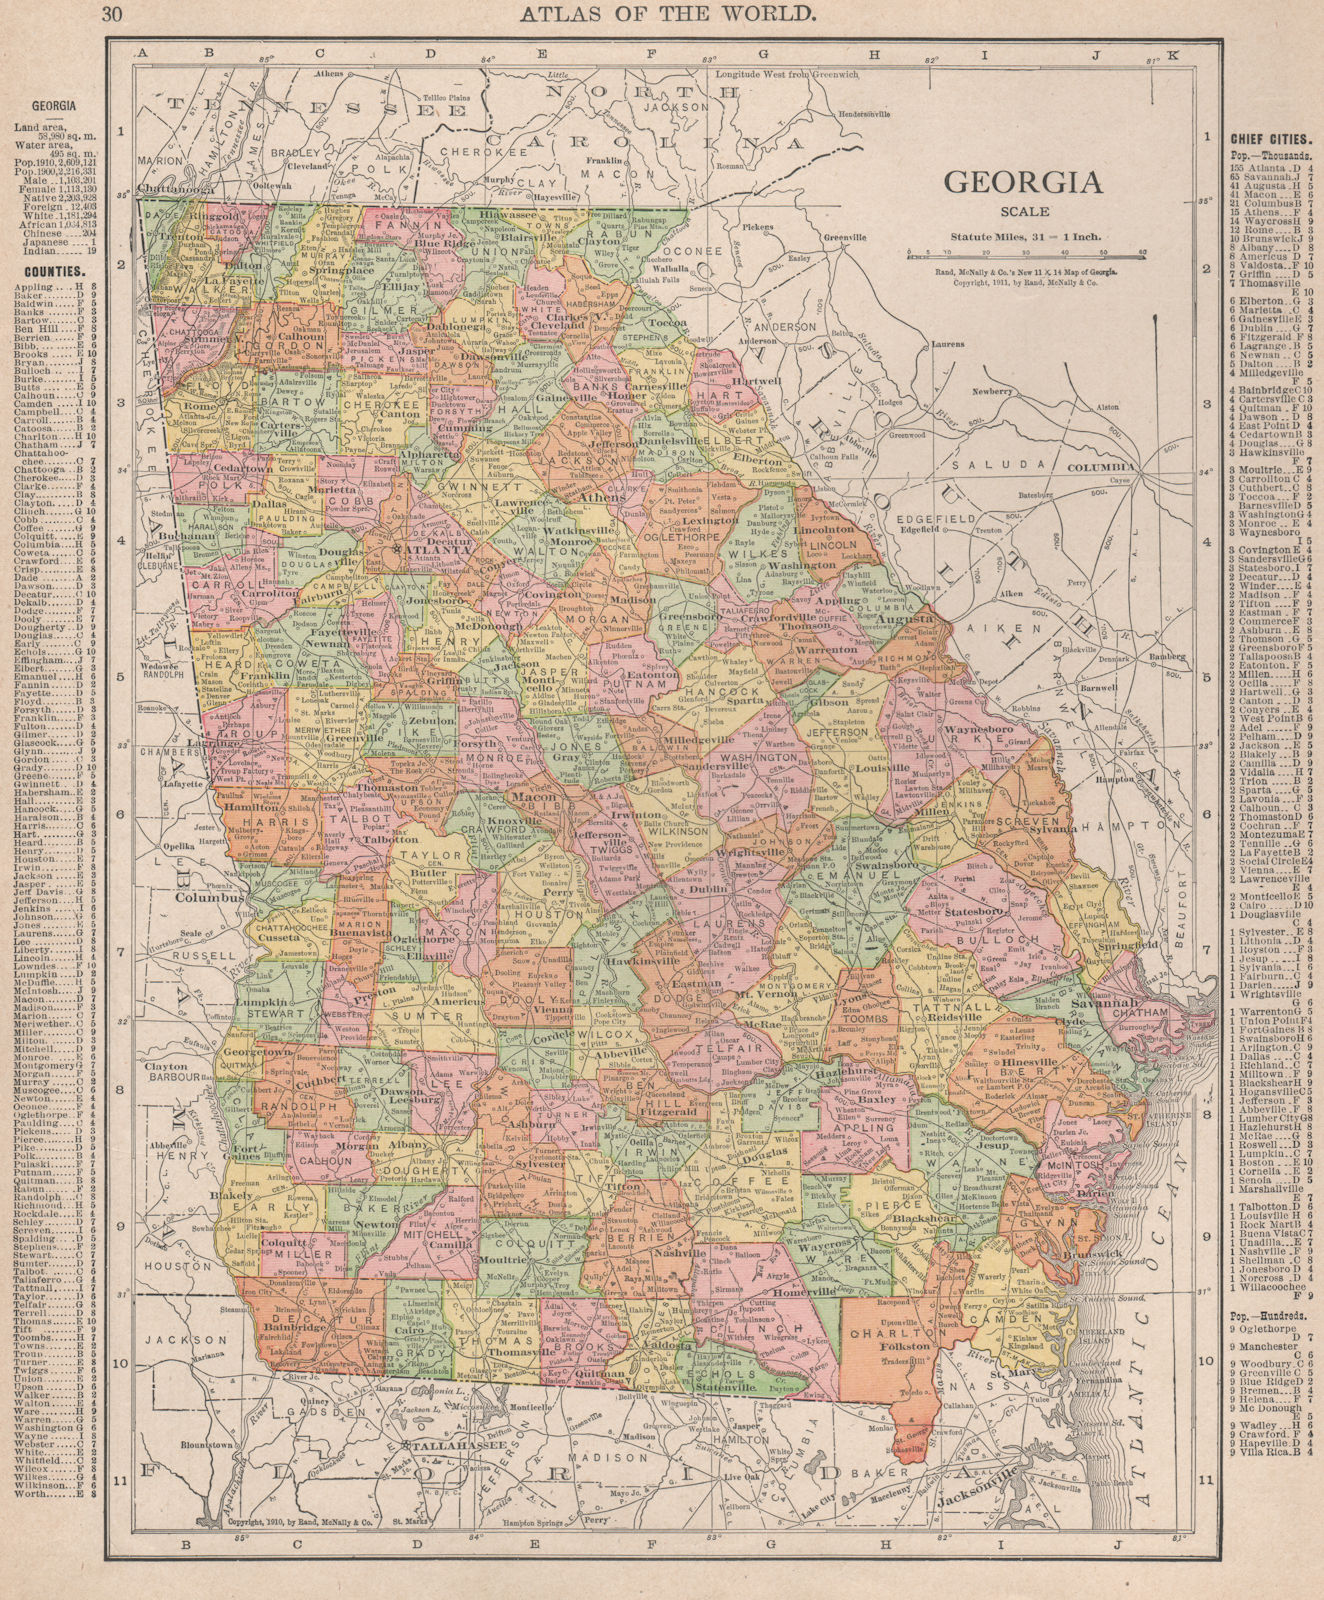 Georgia state map showing counties. RAND MCNALLY 1912 old antique chart